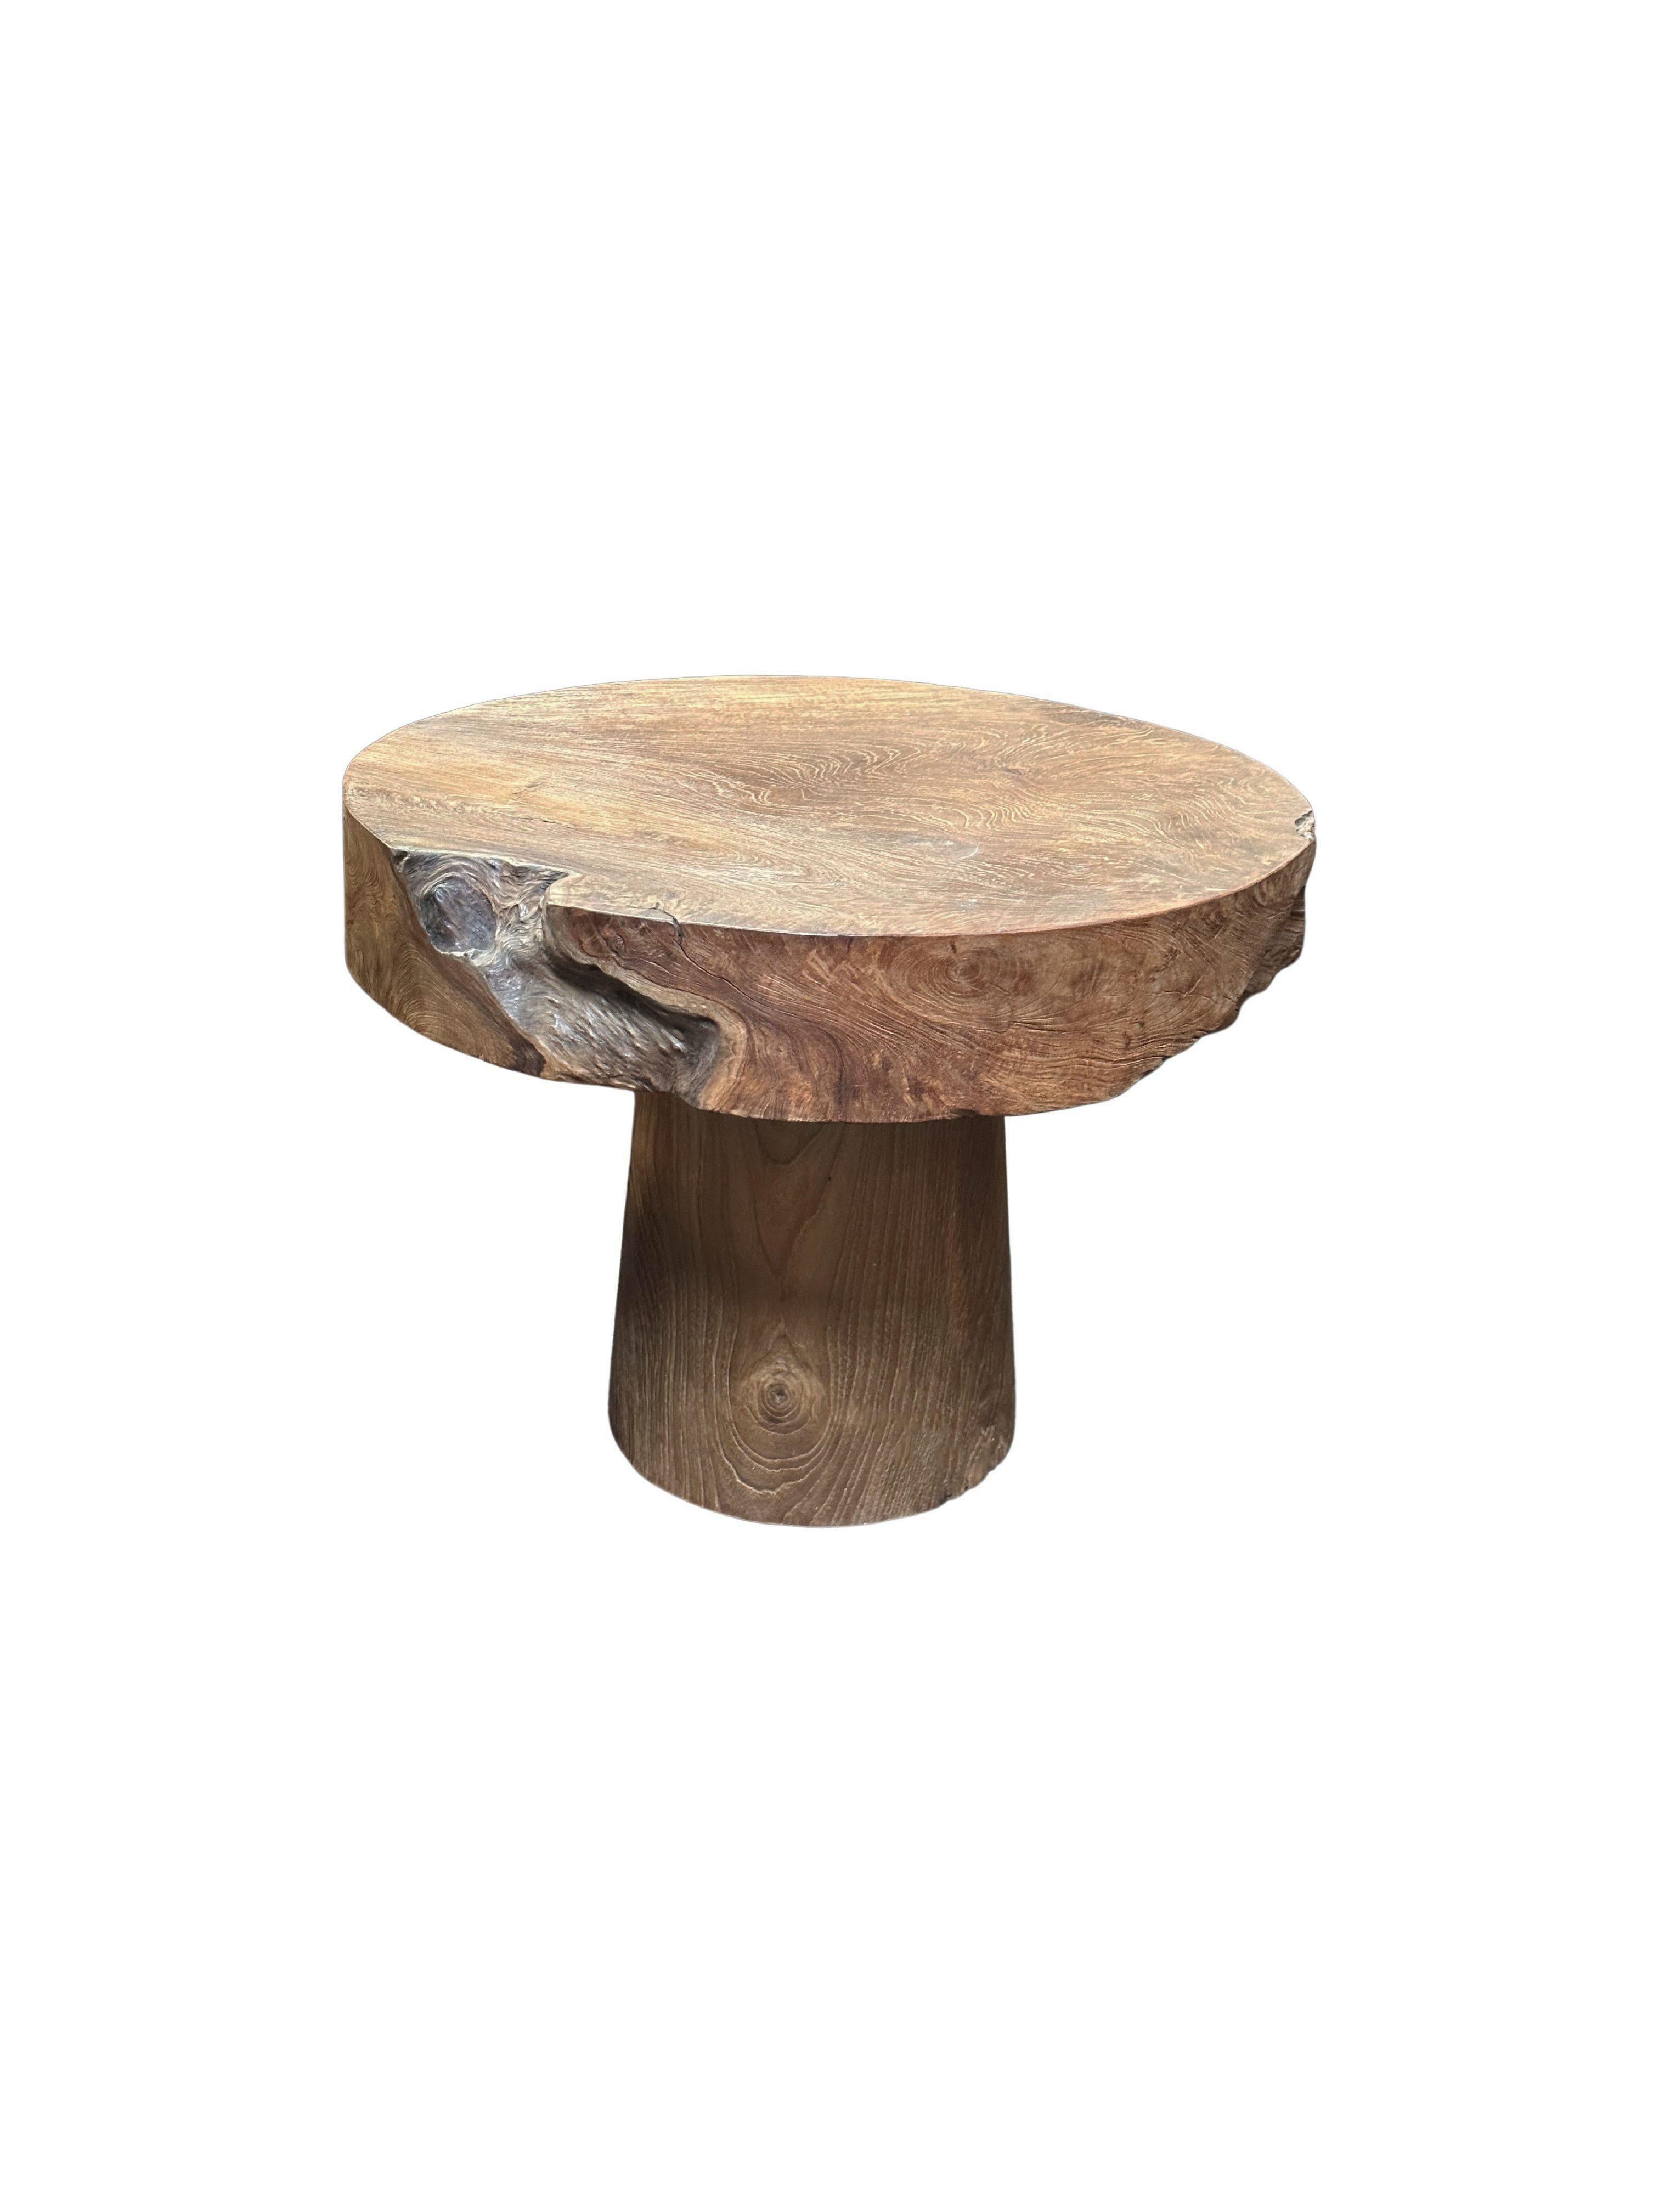 A wonderfully sculptural round side table featuring a natural finish. Its neutral pigment and wood textures add to its charm. This table was crafted from teak wood. 

The images are of a sample table and each custom item although maintaining the